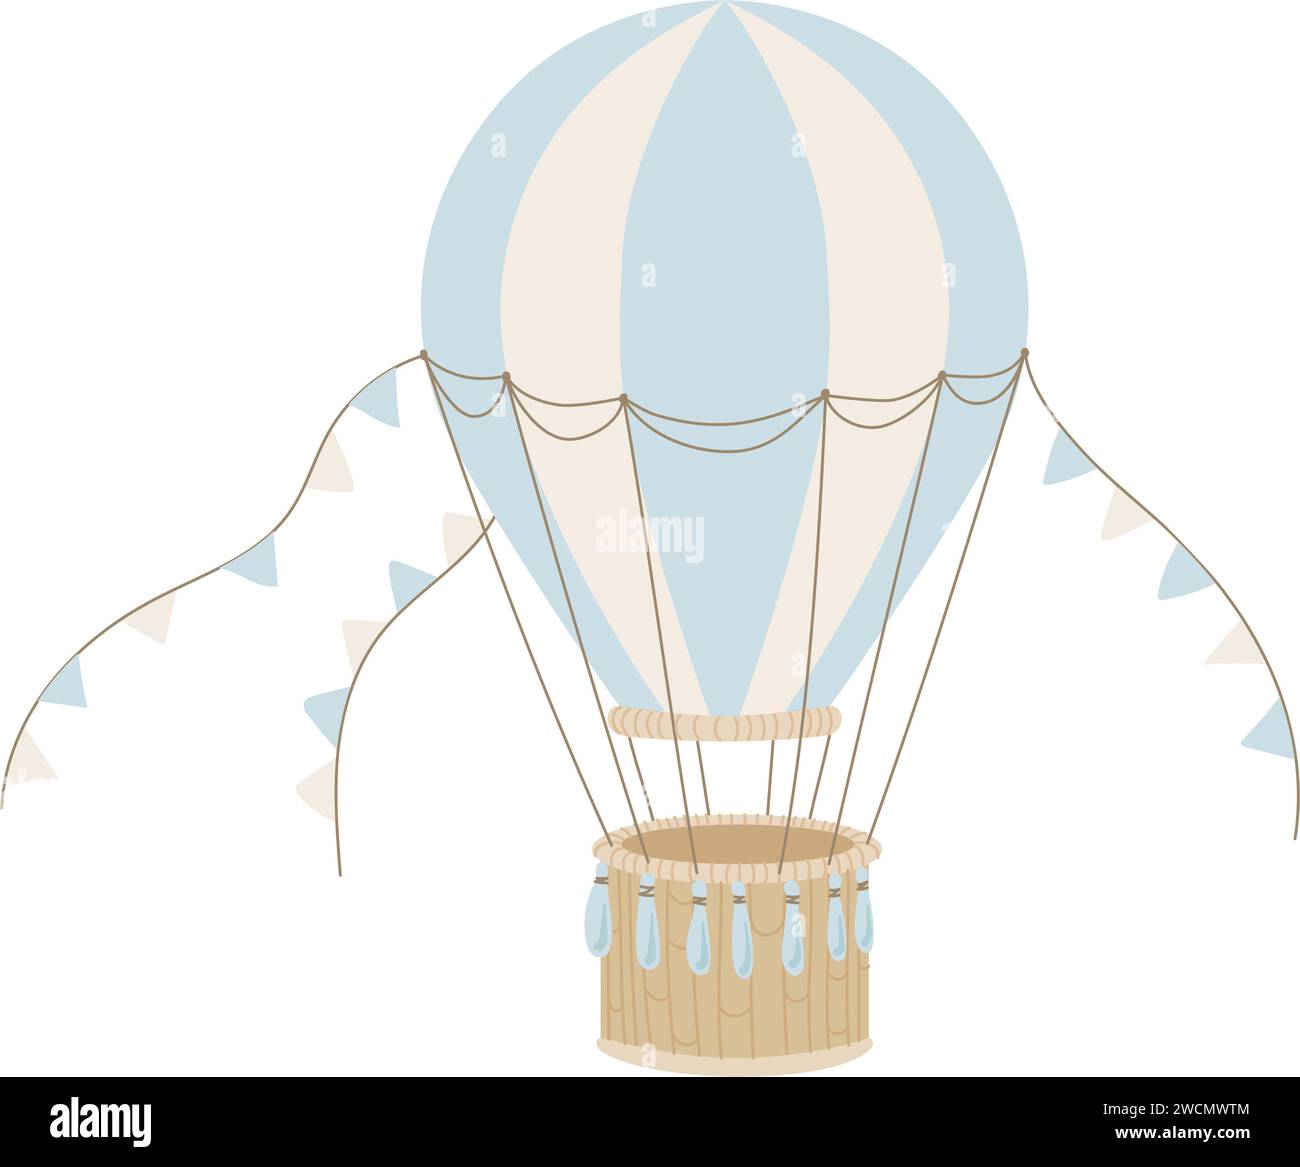 Blue hot Air Balloon vector illustration for Baby shower. Vintage hand drawn aircraft with pennants for Children party or kids cards in cartoon style. Drawing of old retro aircraft for childish design Stock Vector